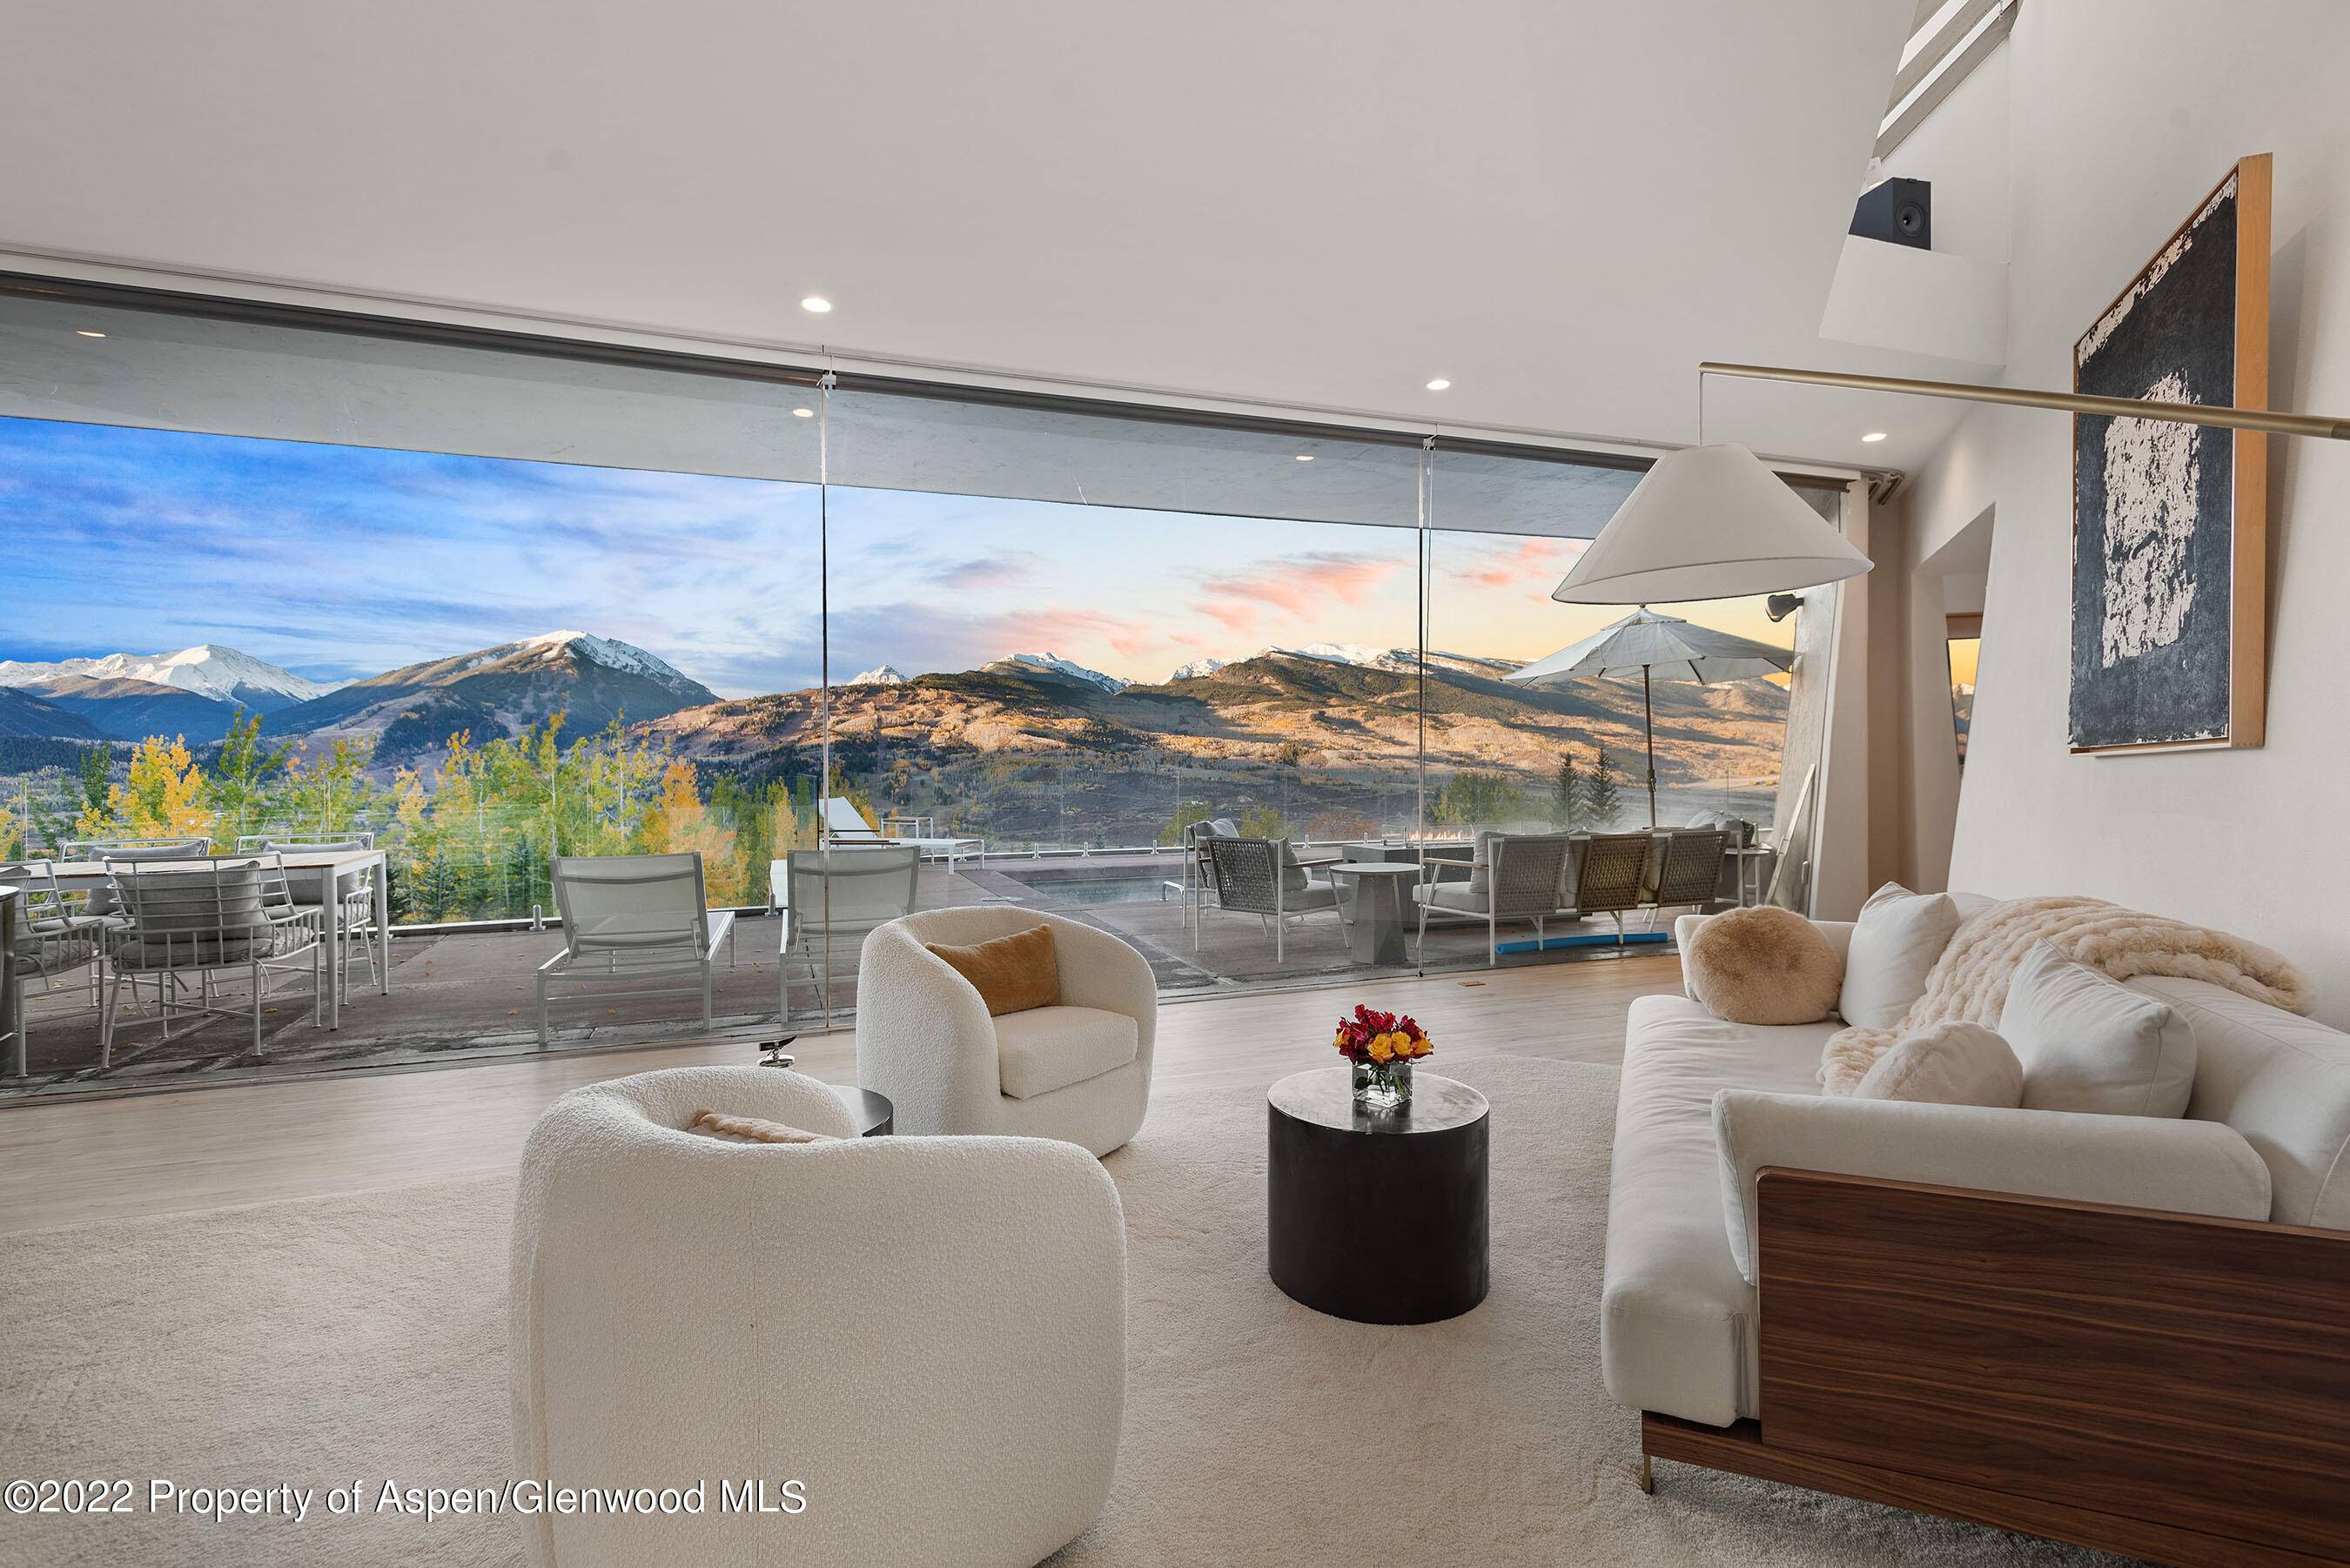 Exquisitely remodeled, this contemporary home in the elite gated Starwood subdivision has unrivaled, expansive views from Independence Pass to Mount Sopris.